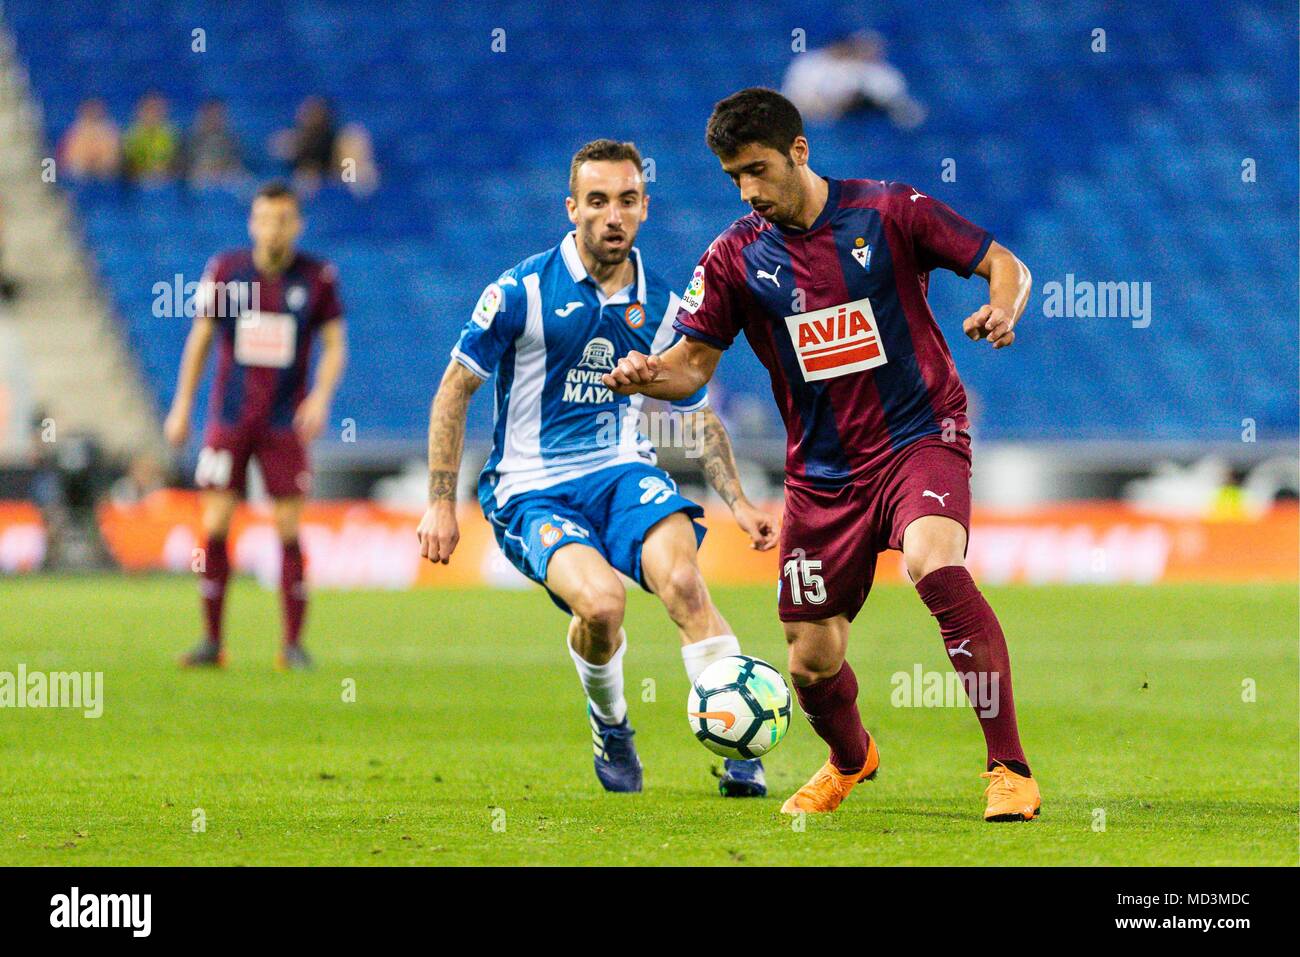 SPAIN - 18th of April: SD Eibar defender Jose Angel (15) and RCD Espanyol  midfielder Sergi Darder (25) during the match between RCD Espanyol v Eibar  for the round 33 of the